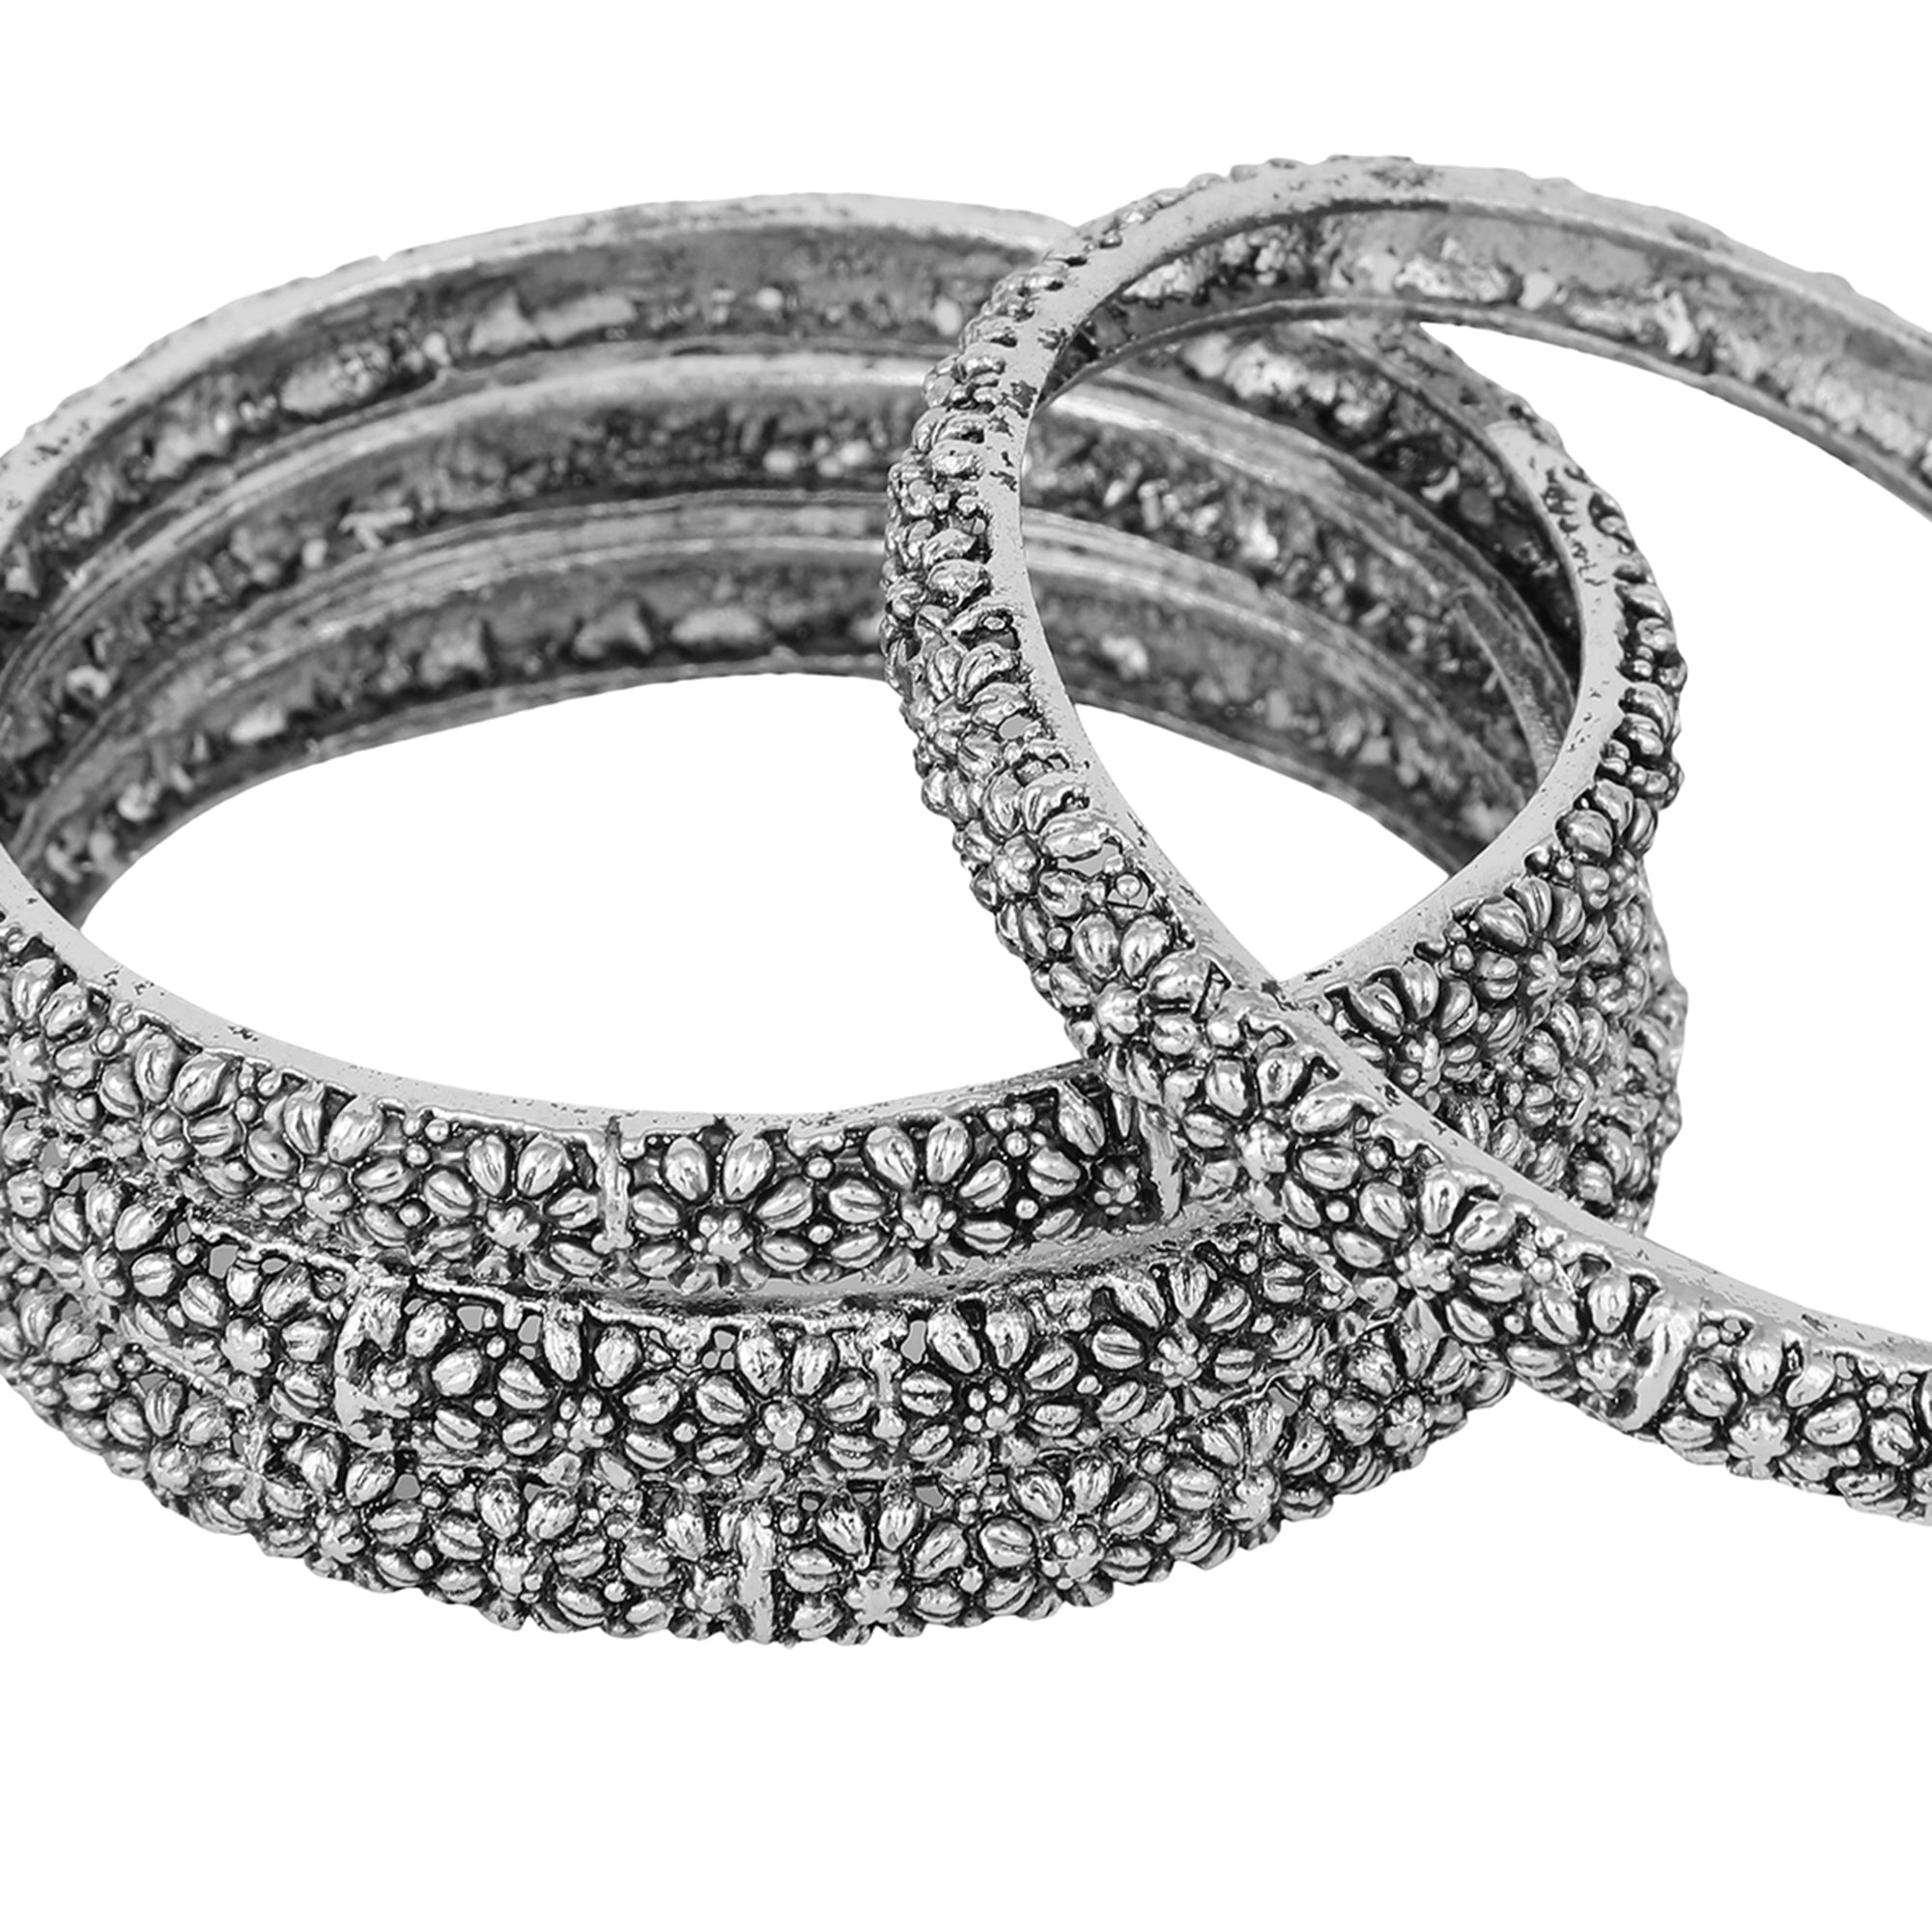 Women's Set Of 4 Oxidised Silver-Plated Hand Crafted Bangles - Anikas Creation